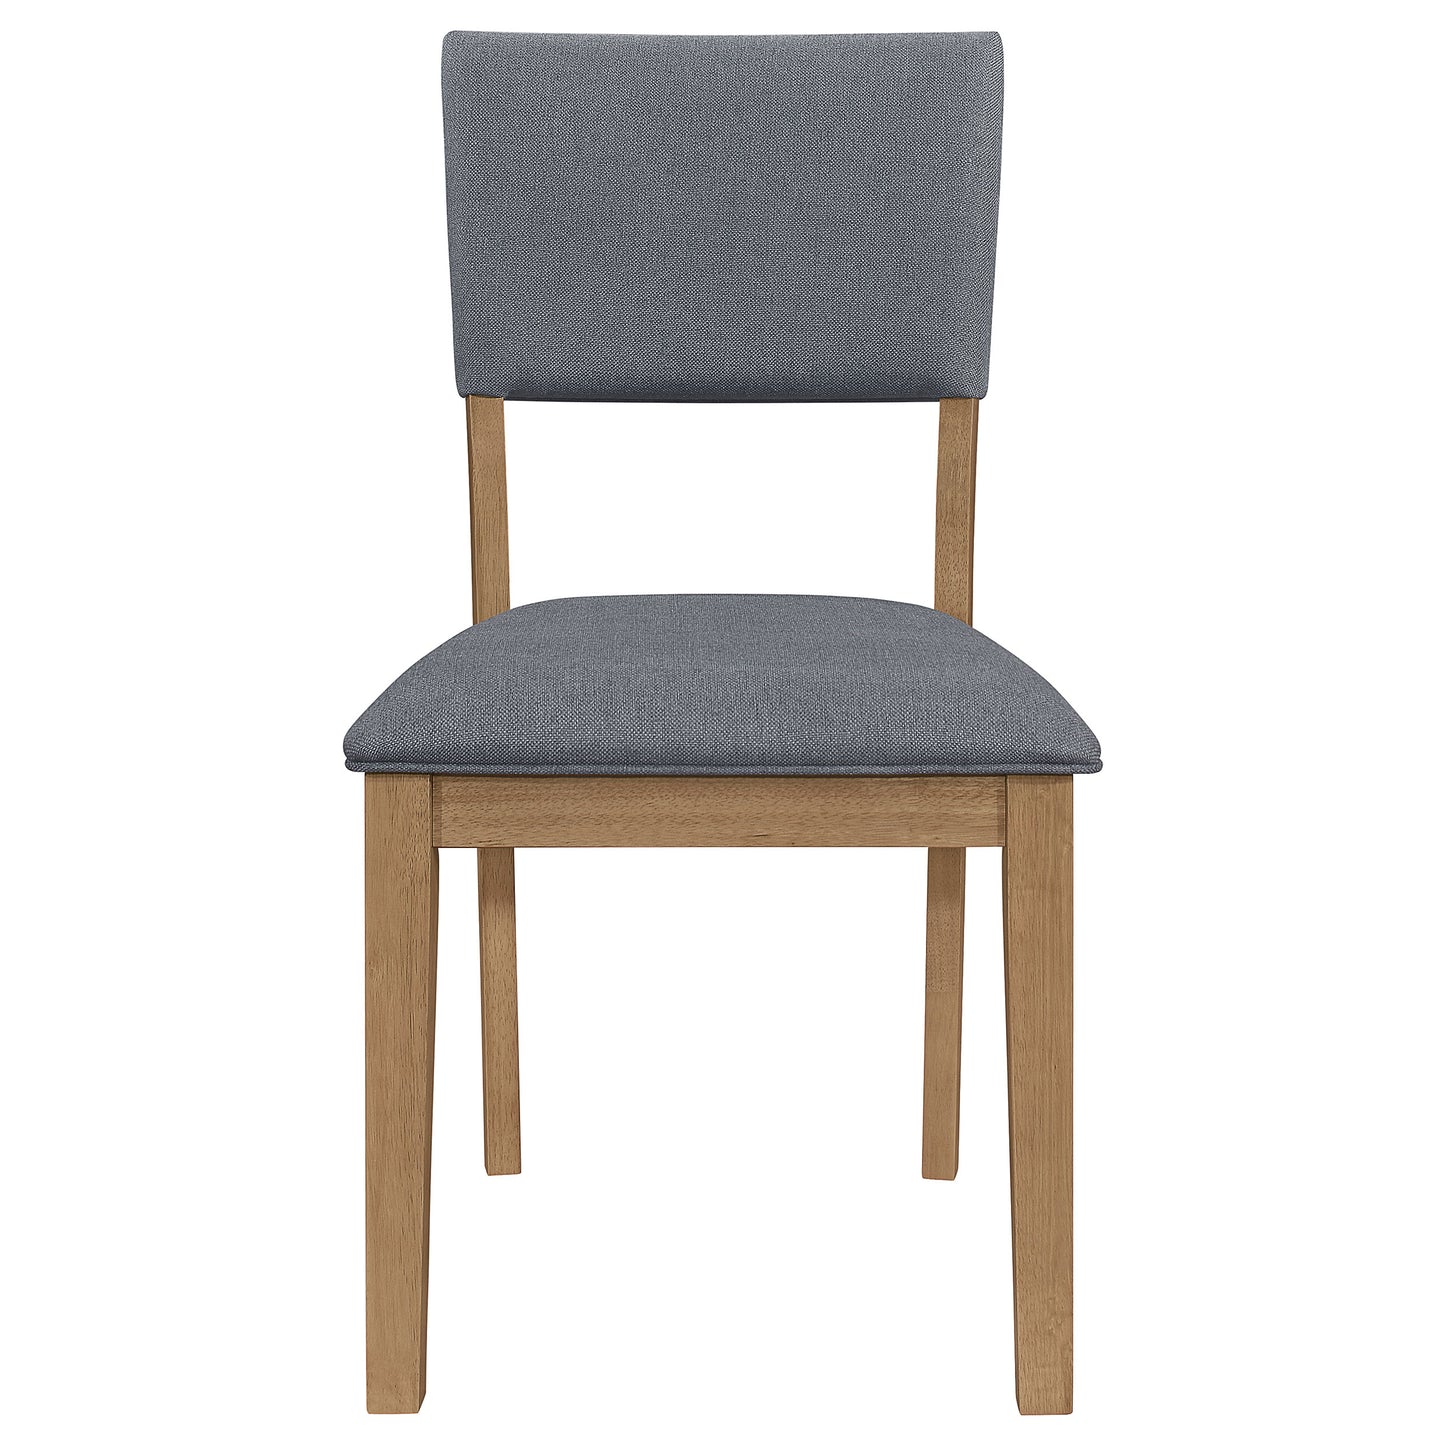 Sharon Open Back Padded Upholstered Dining Side Chair Blue and Brown (Set of 2)